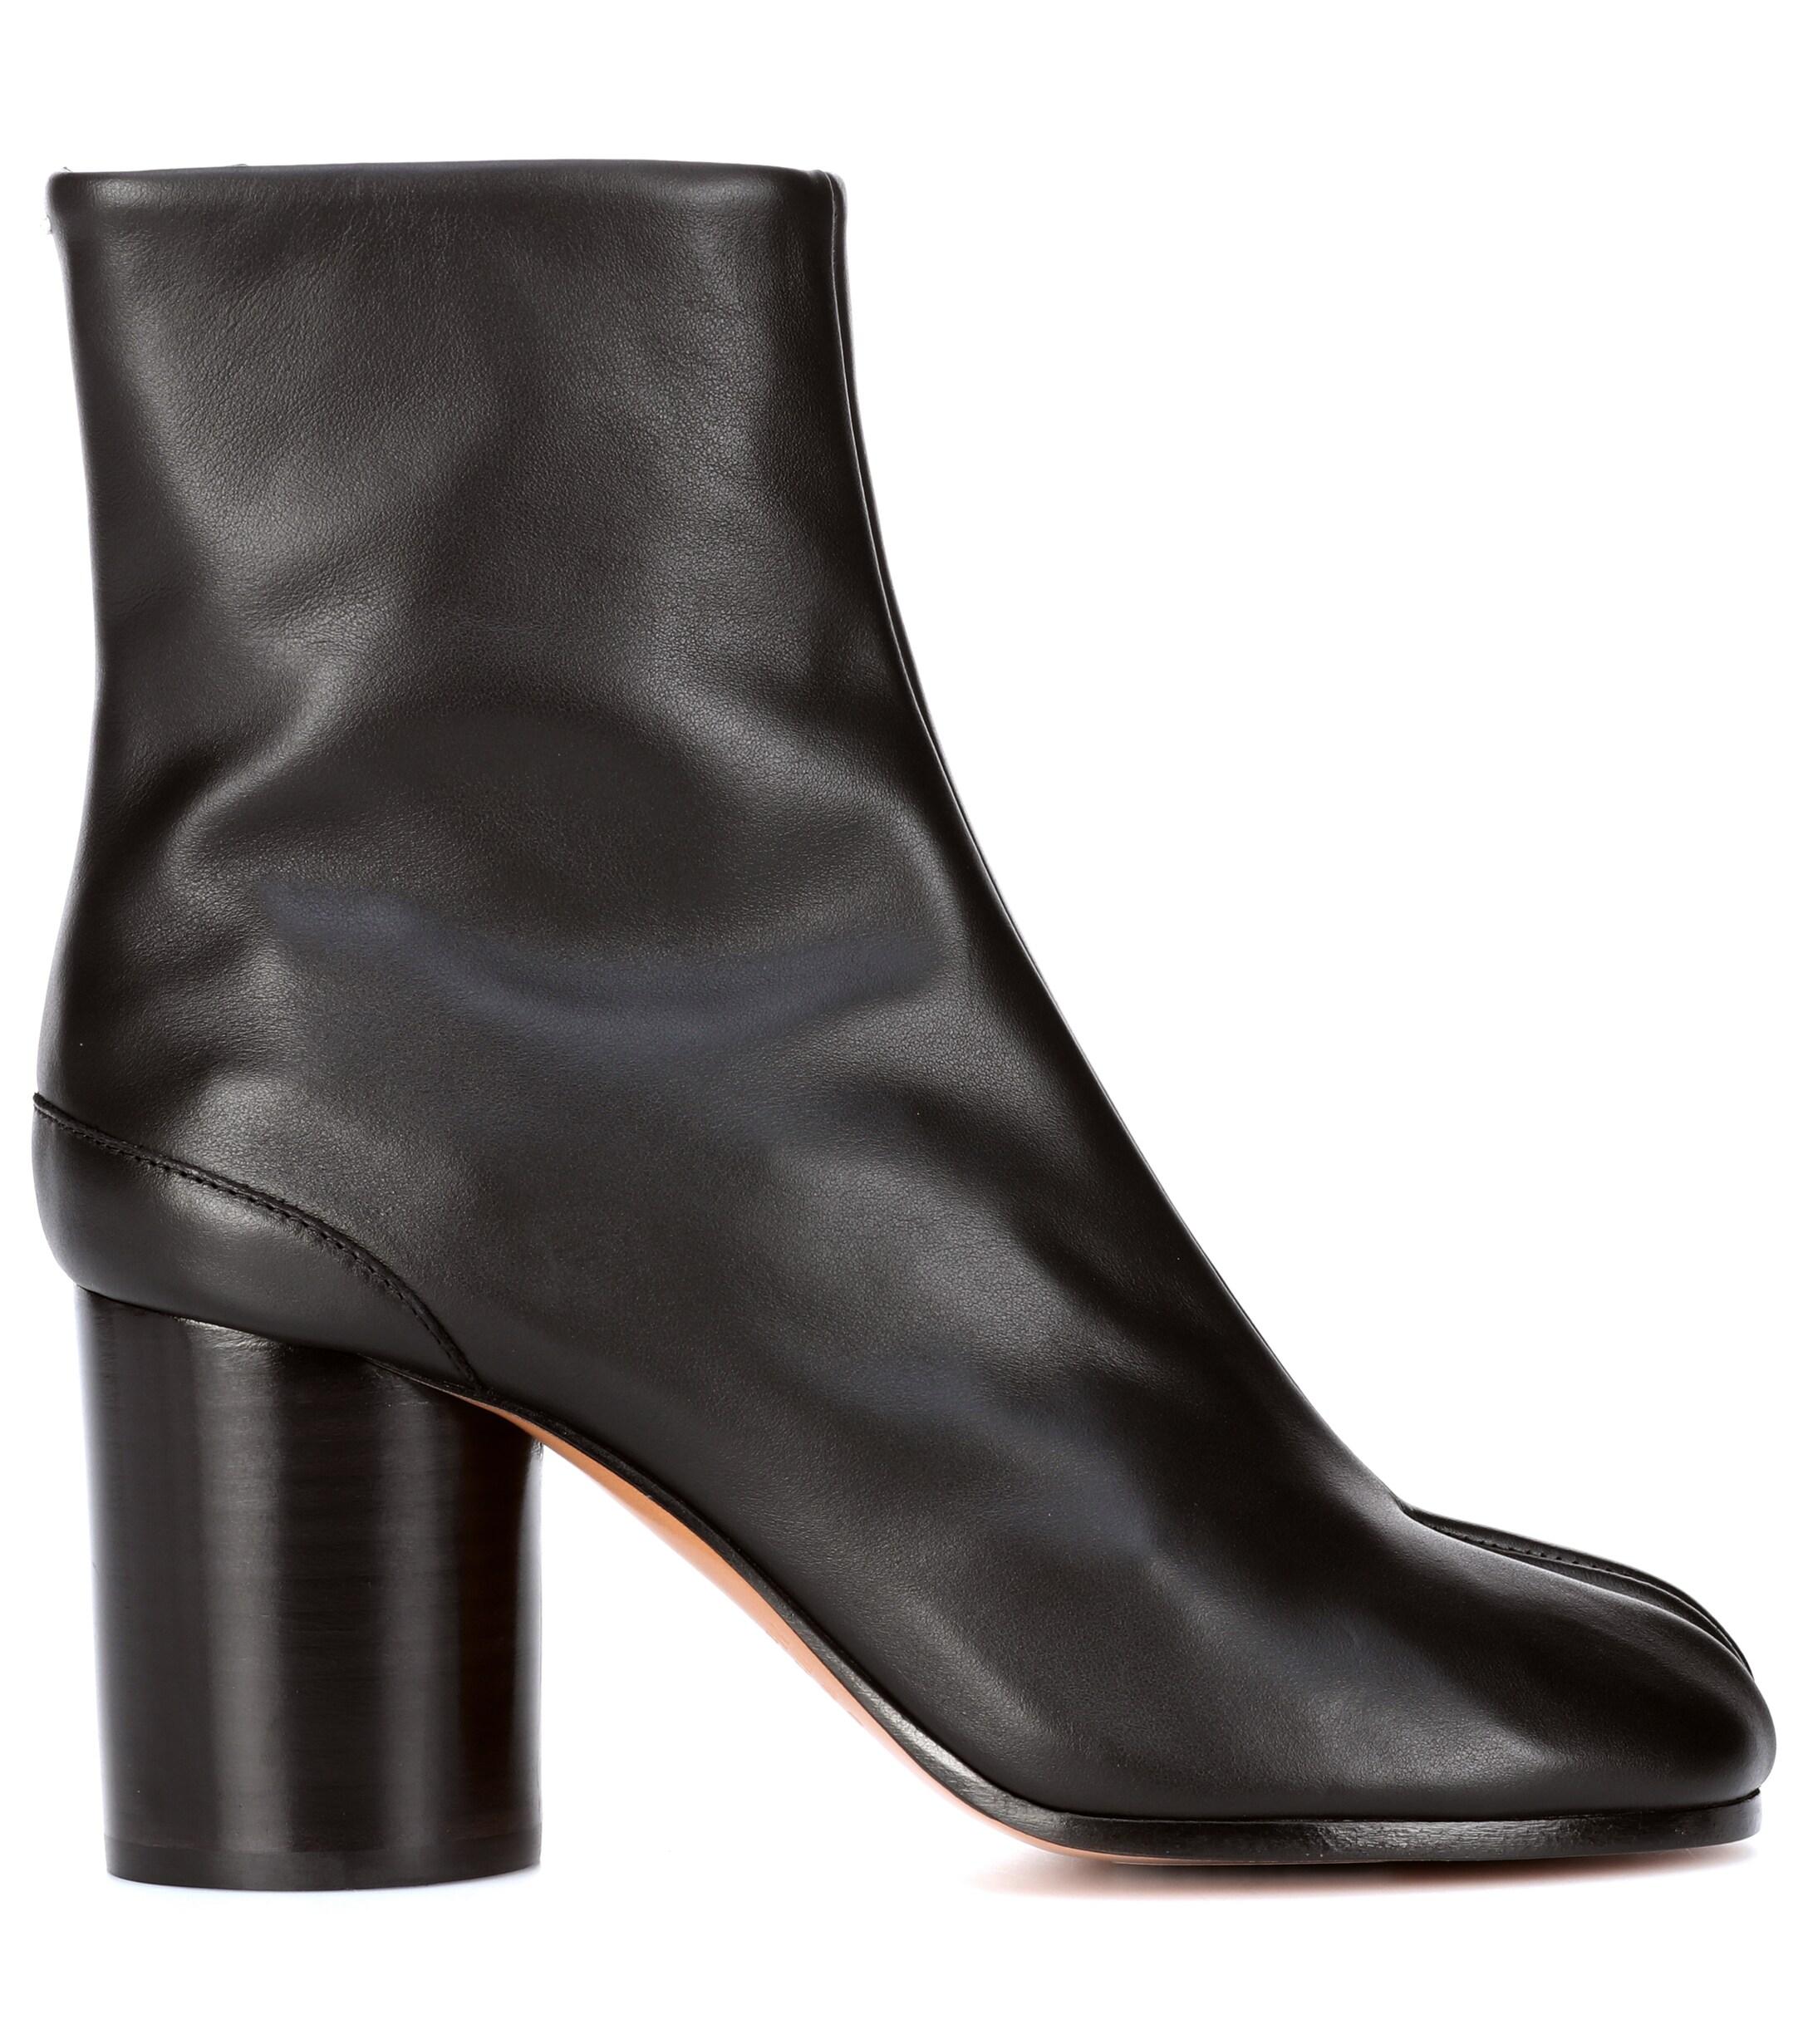 Maison Margiela Tabi Leather Ankle Boots in Black | Lyst